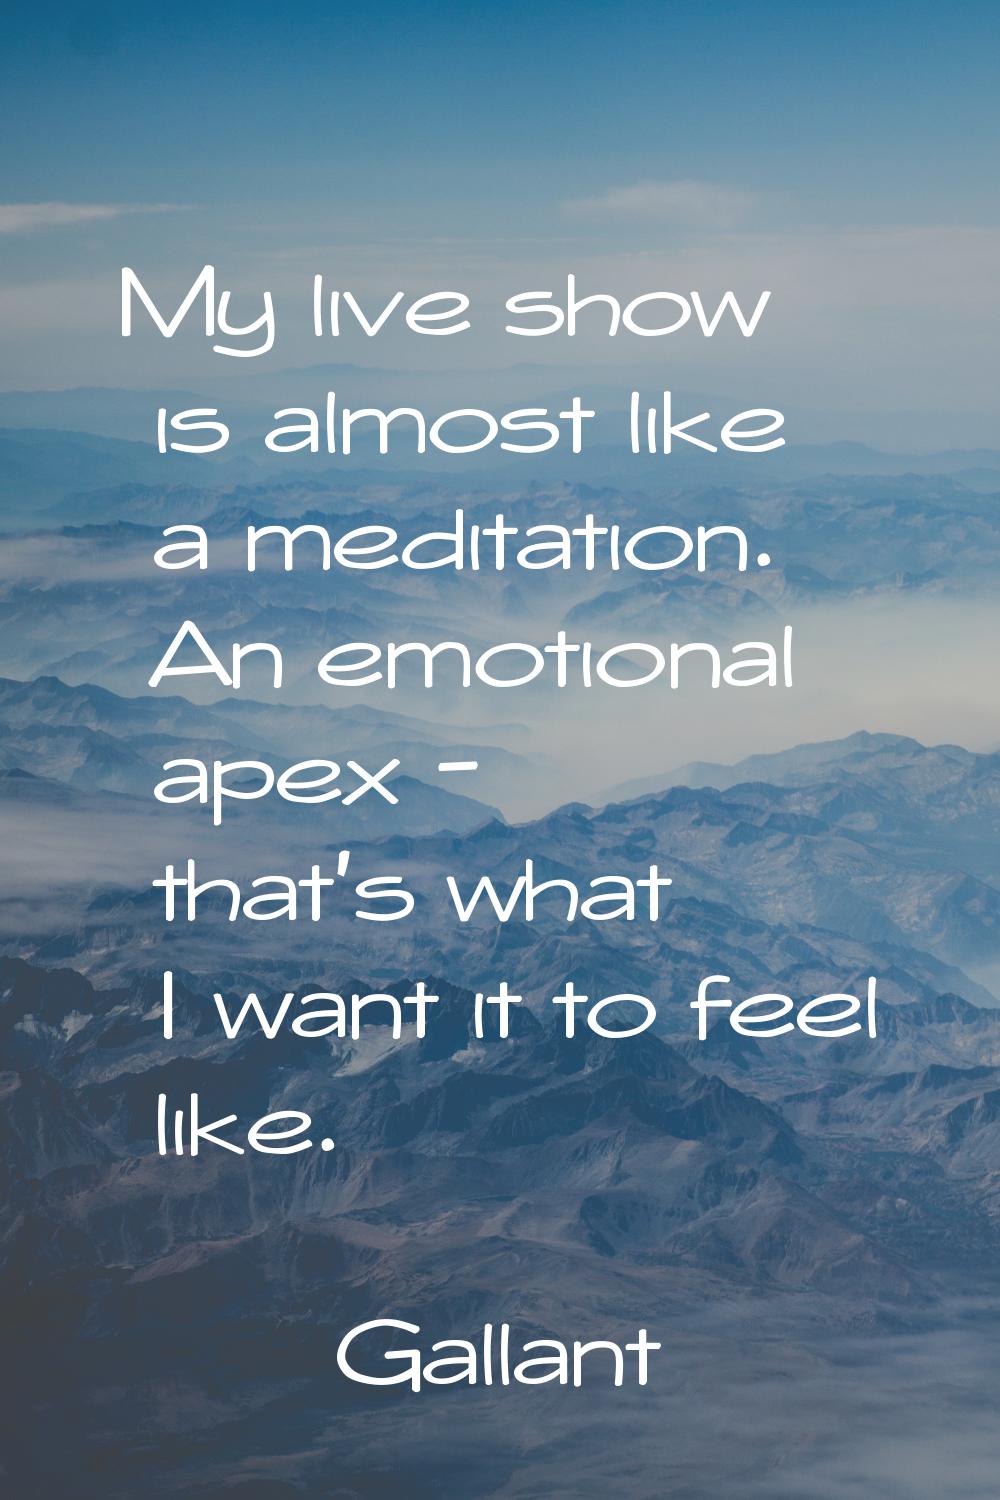 My live show is almost like a meditation. An emotional apex - that's what I want it to feel like.